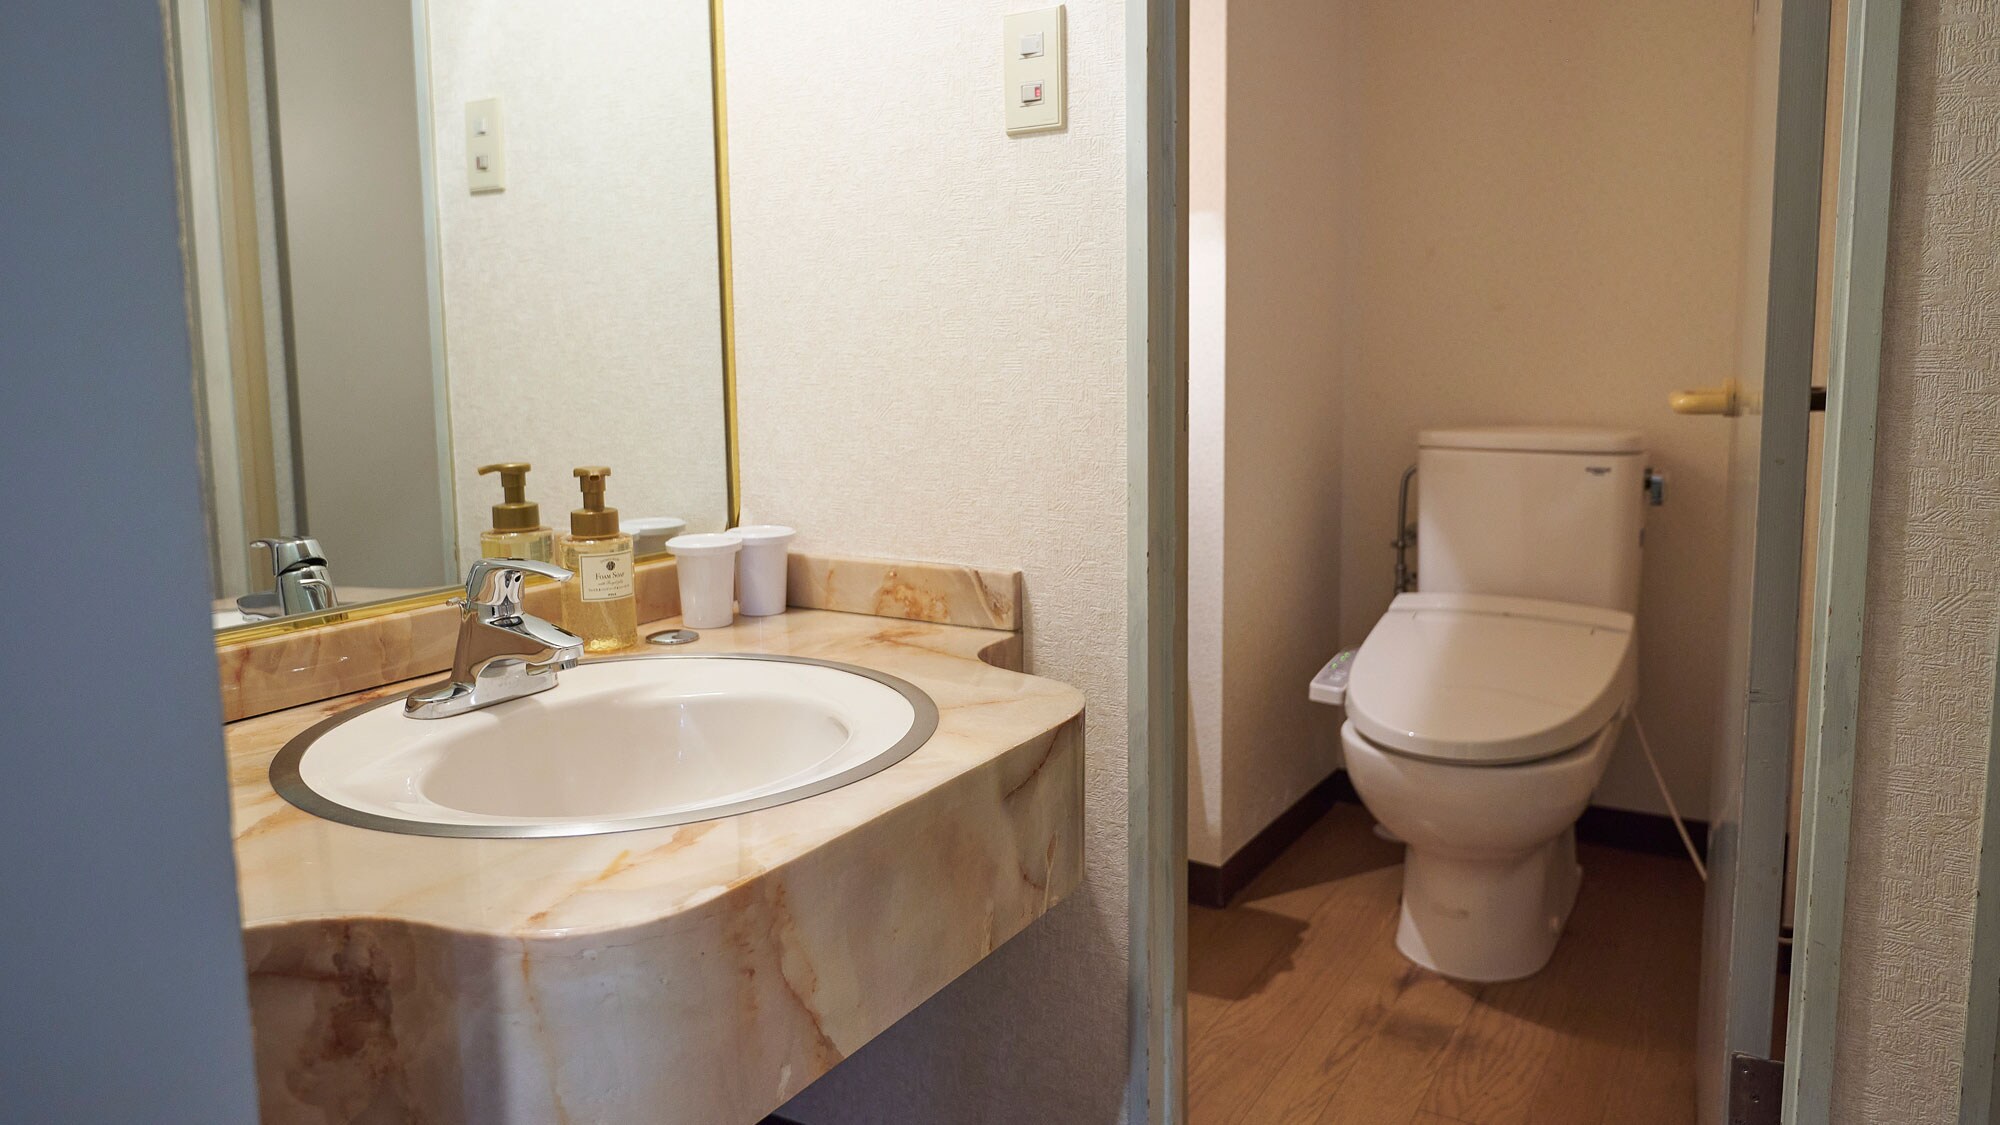 An example of a bathroom *The double and twin rooms have separate baths, sinks, and toilets.